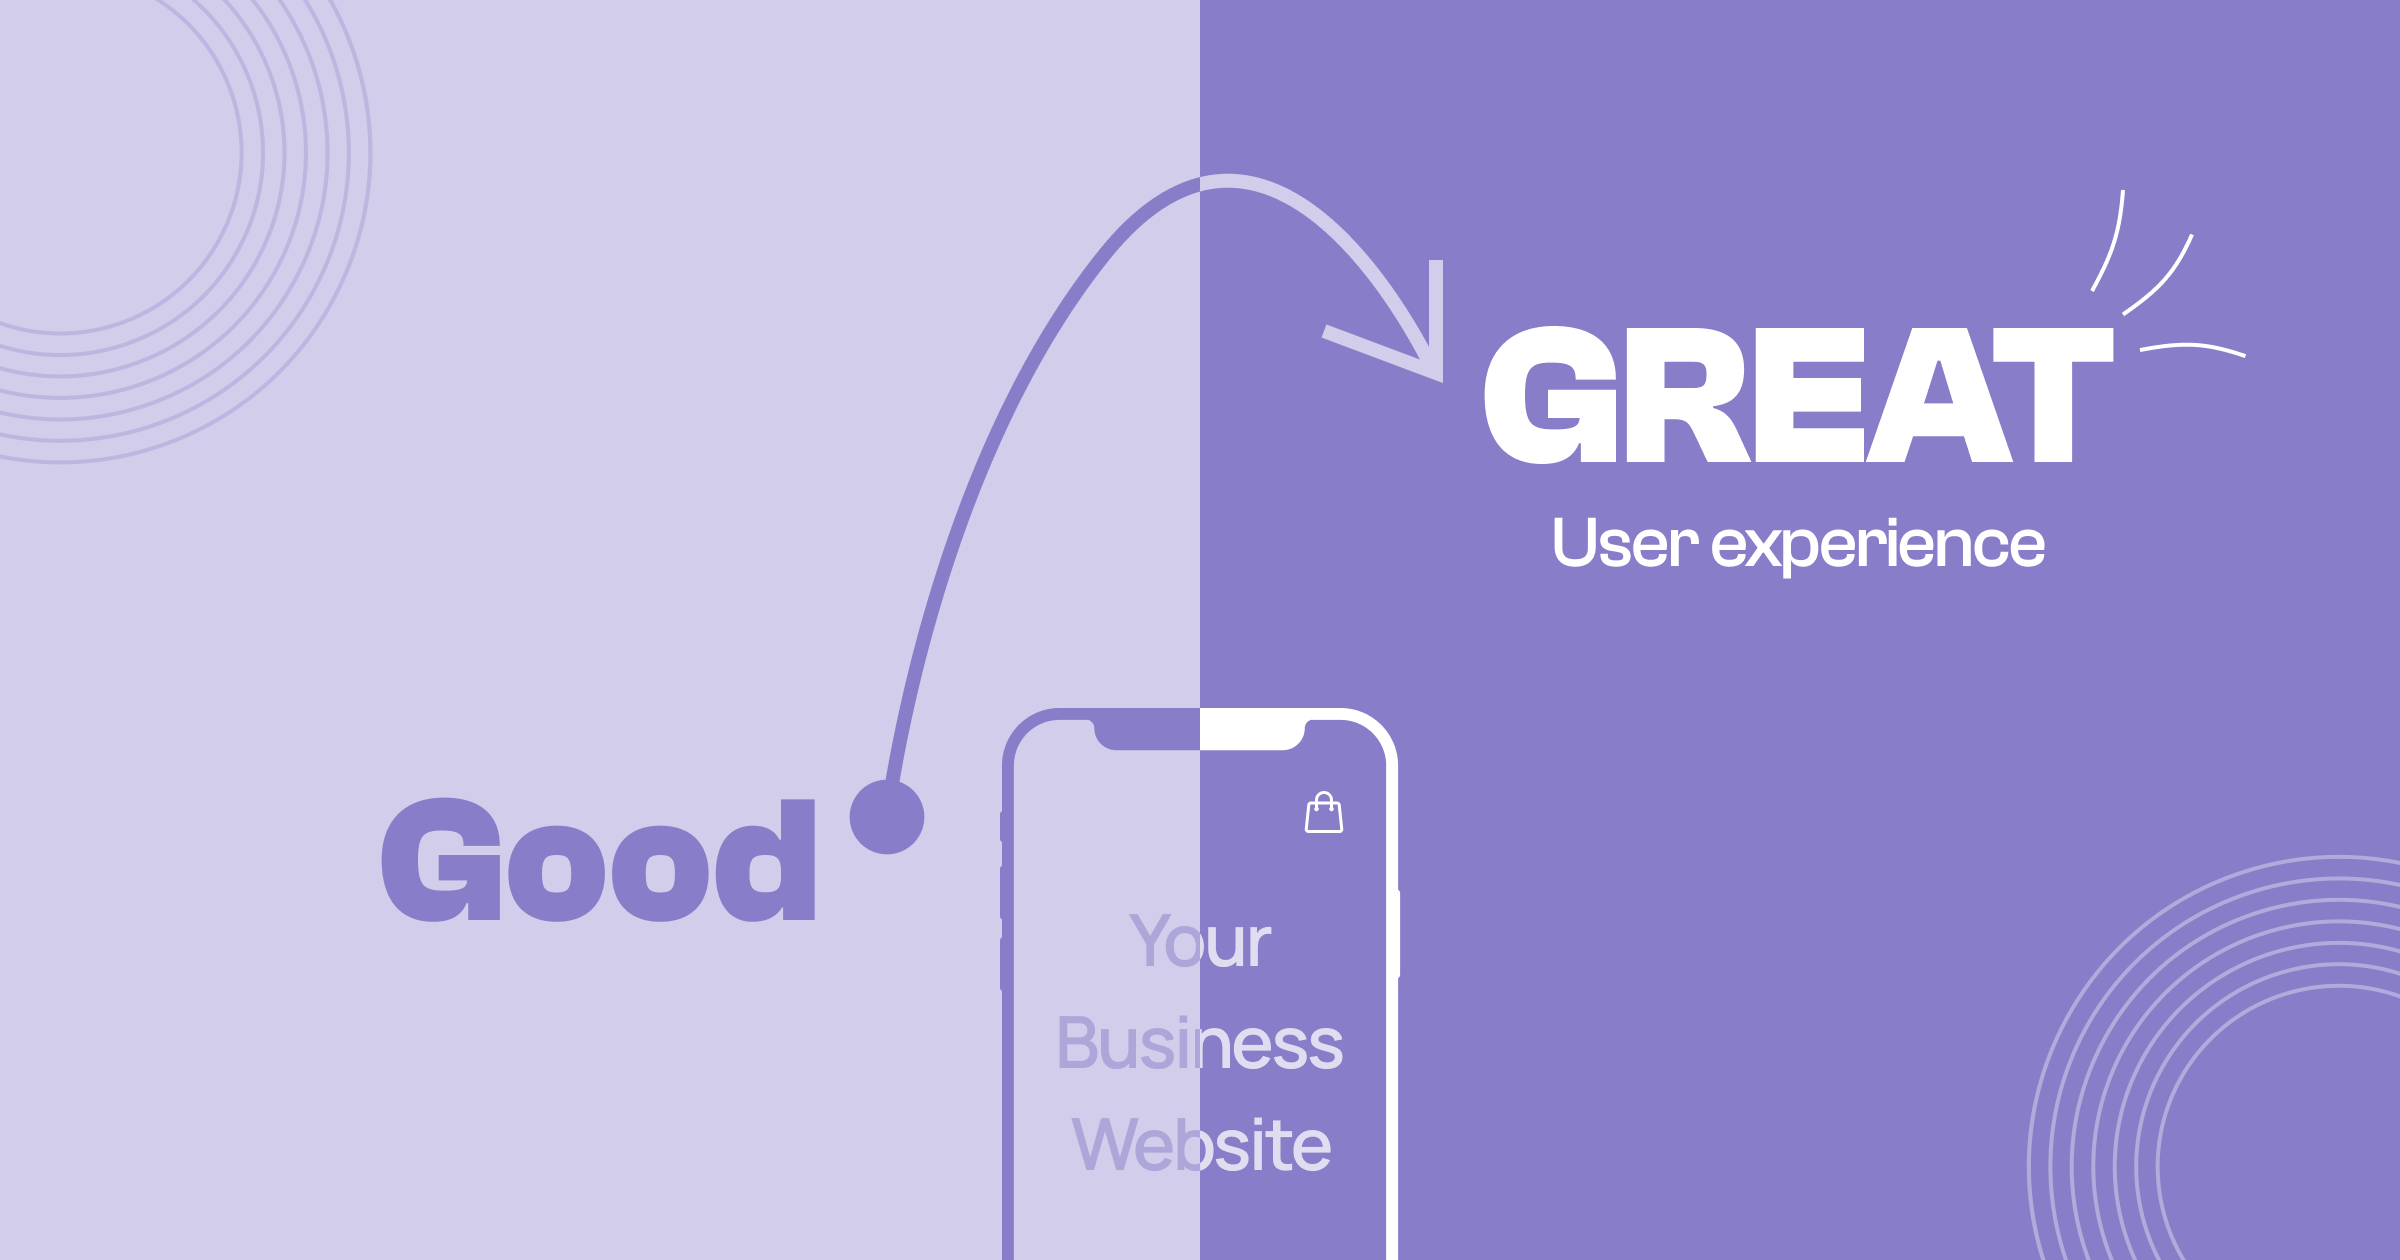 A curved arrow pointing from "Good" to "Great"